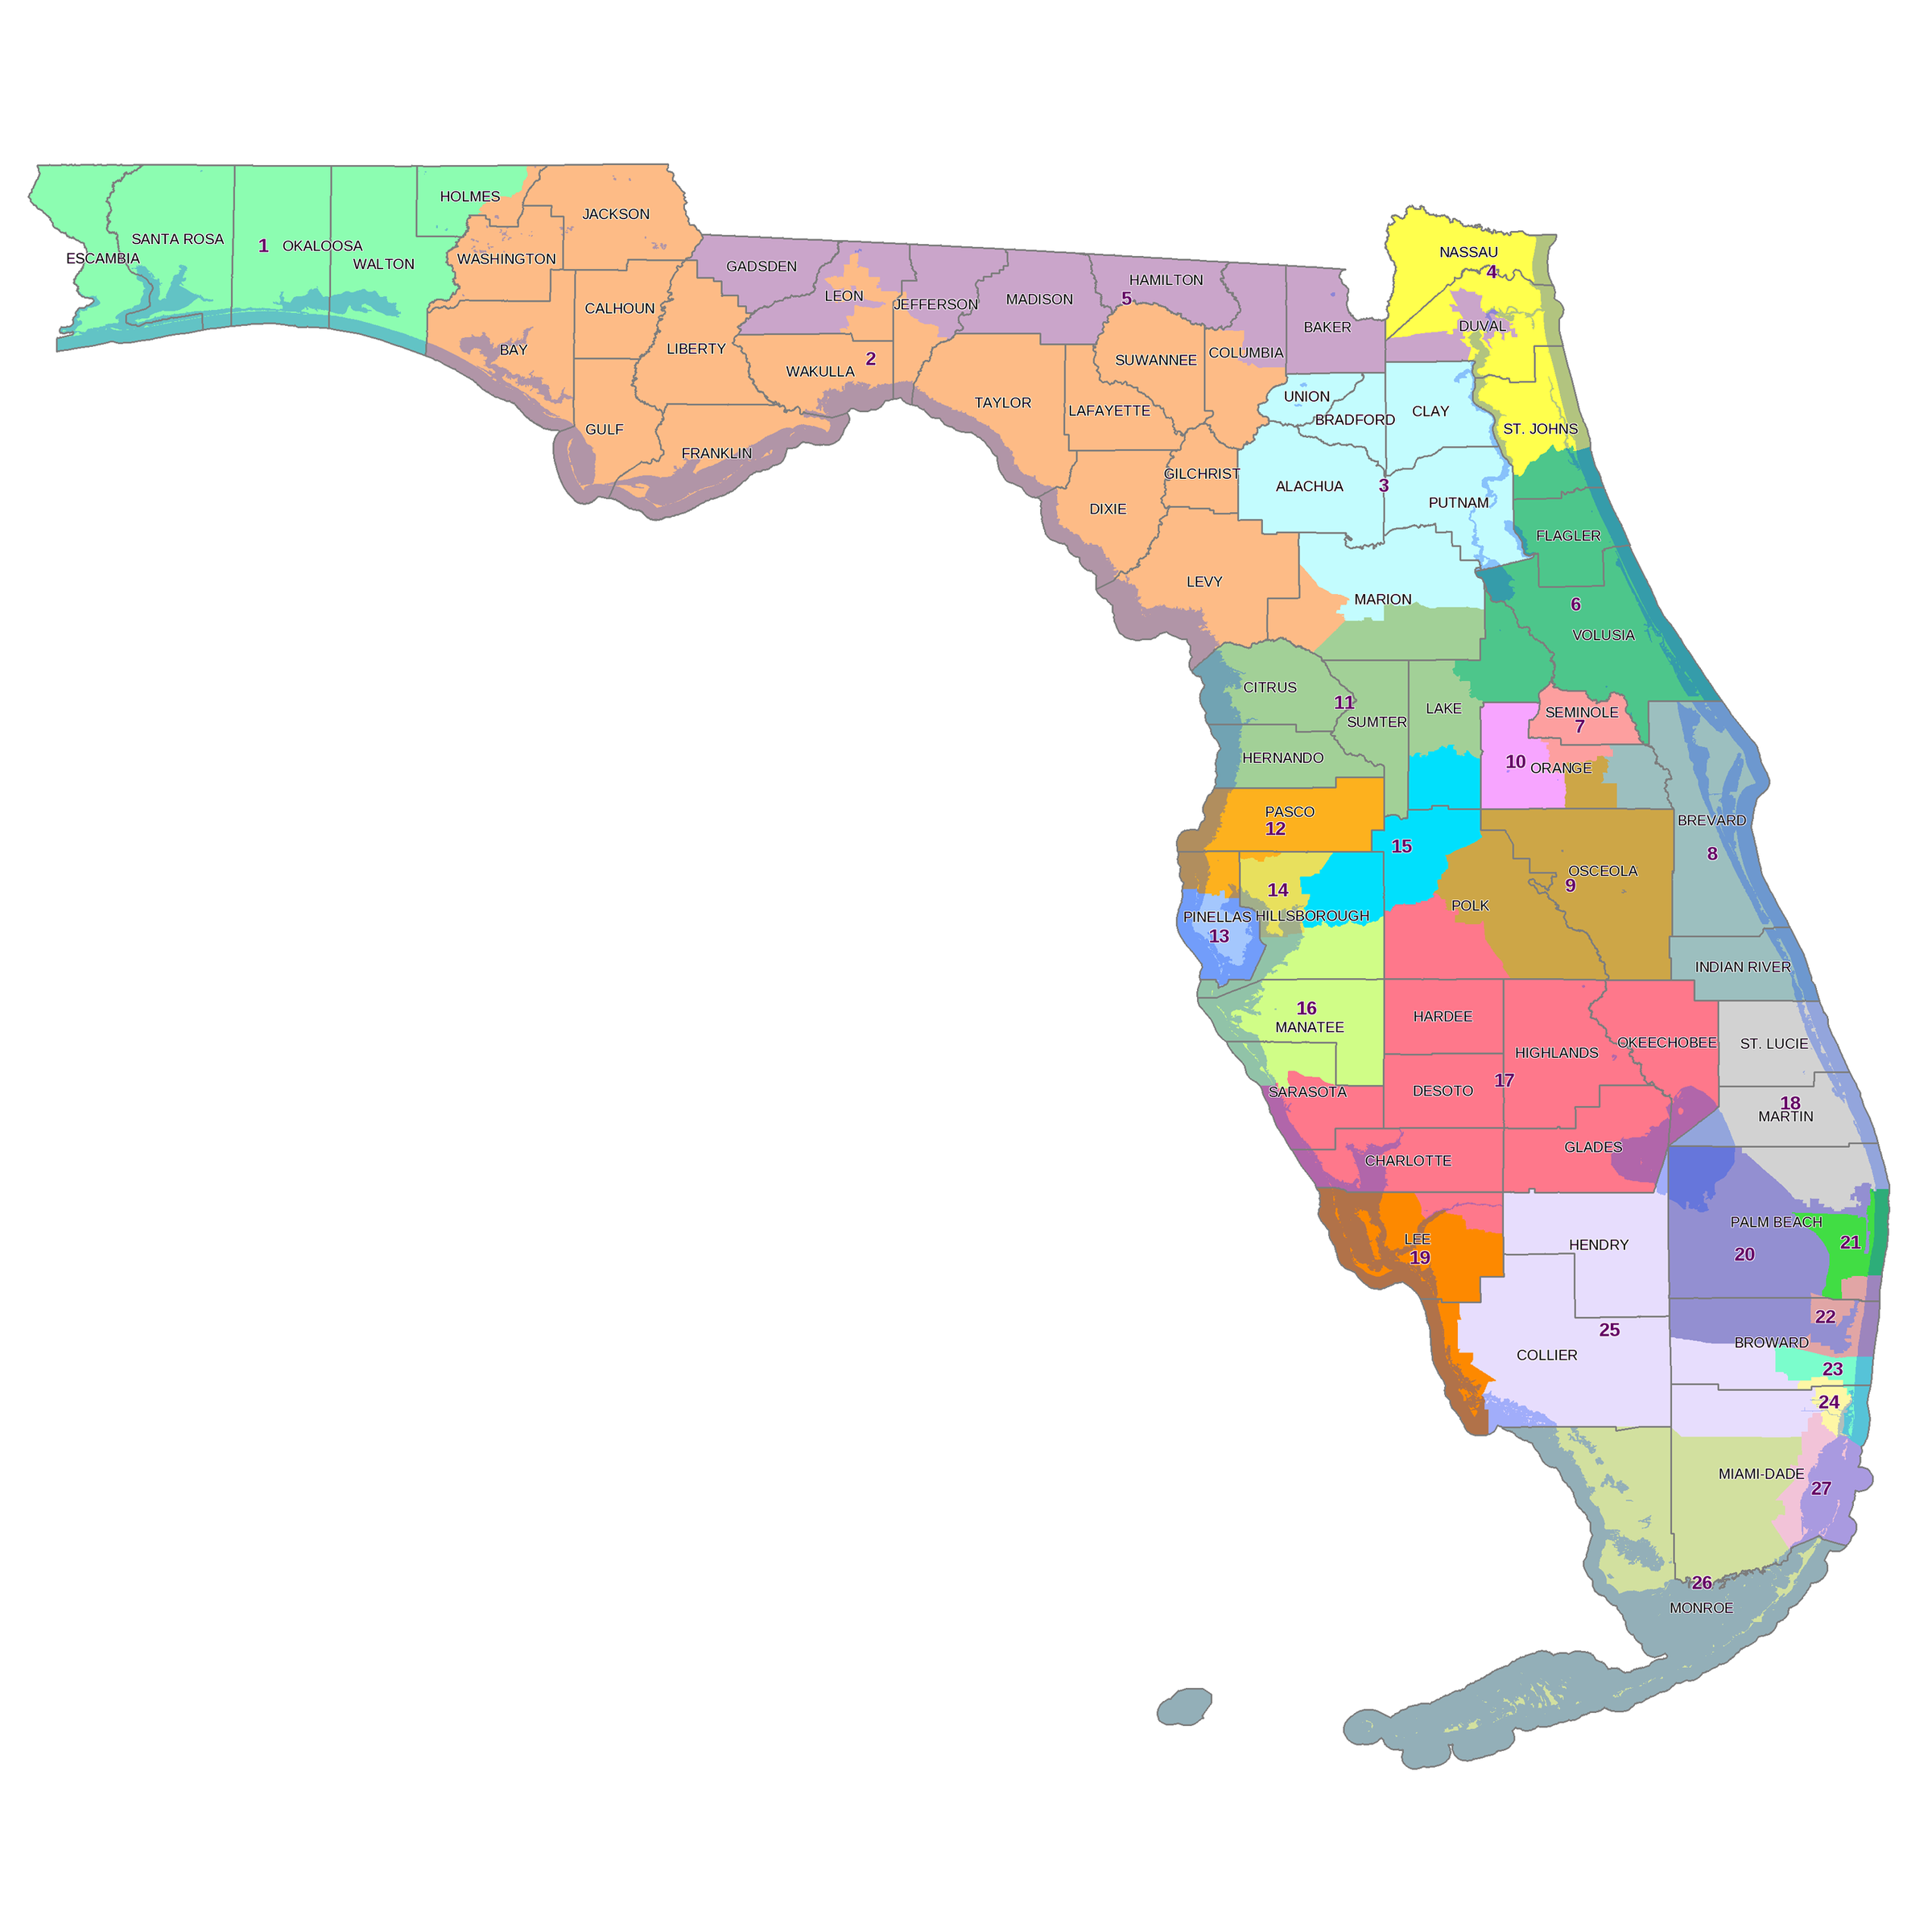 congressional districts florida map house district voting redistricting wjct session stage sets special political legislative fire taking fl state maps